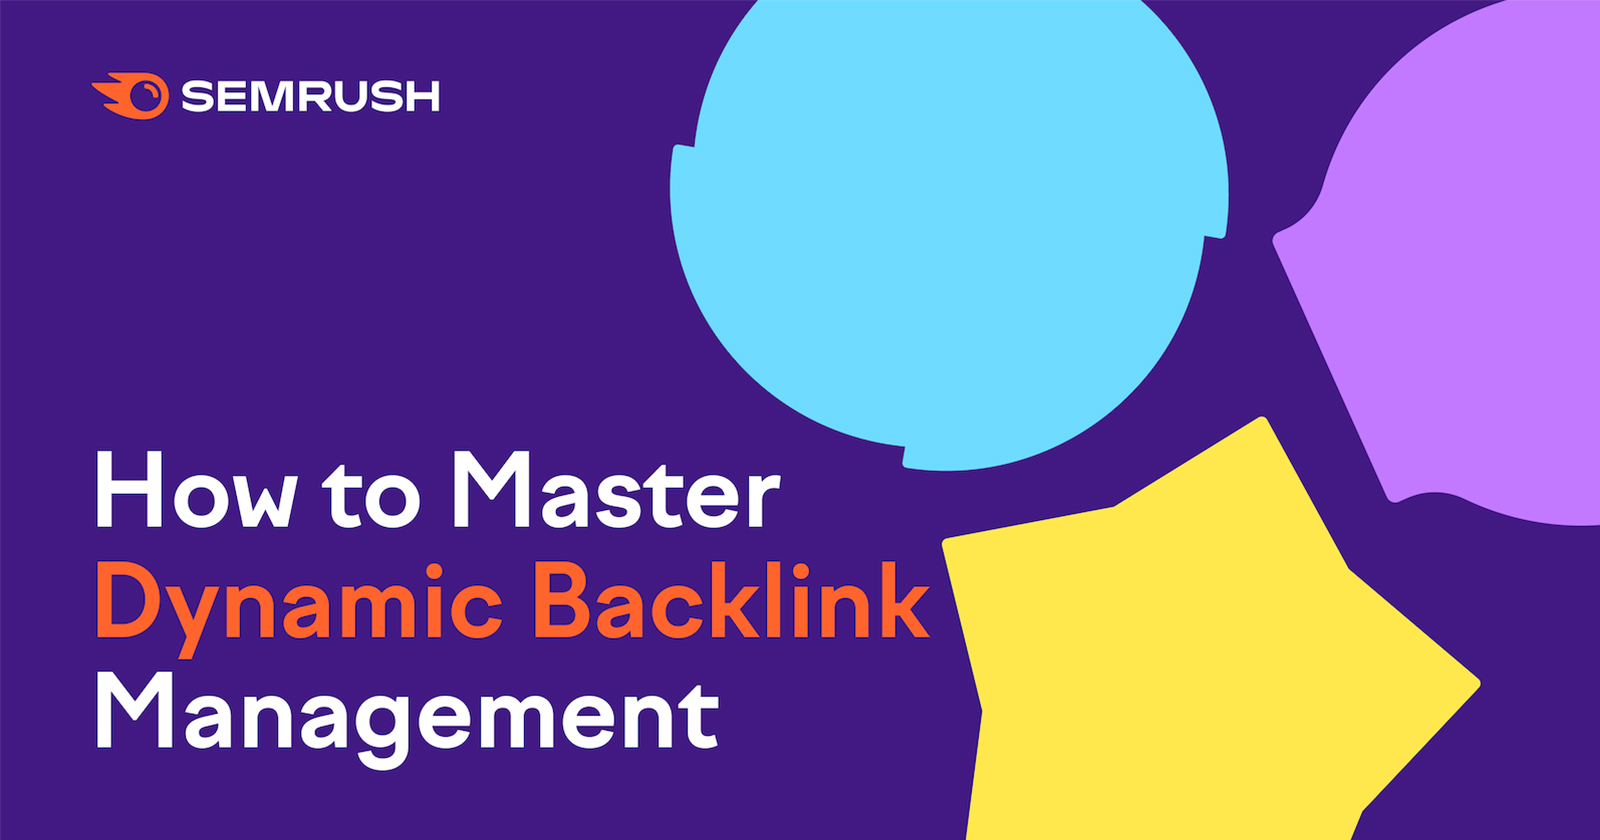 Master Dynamic Back Links Administration With The Semrush Web Link Structure Collection Using , @semrush thumbnail